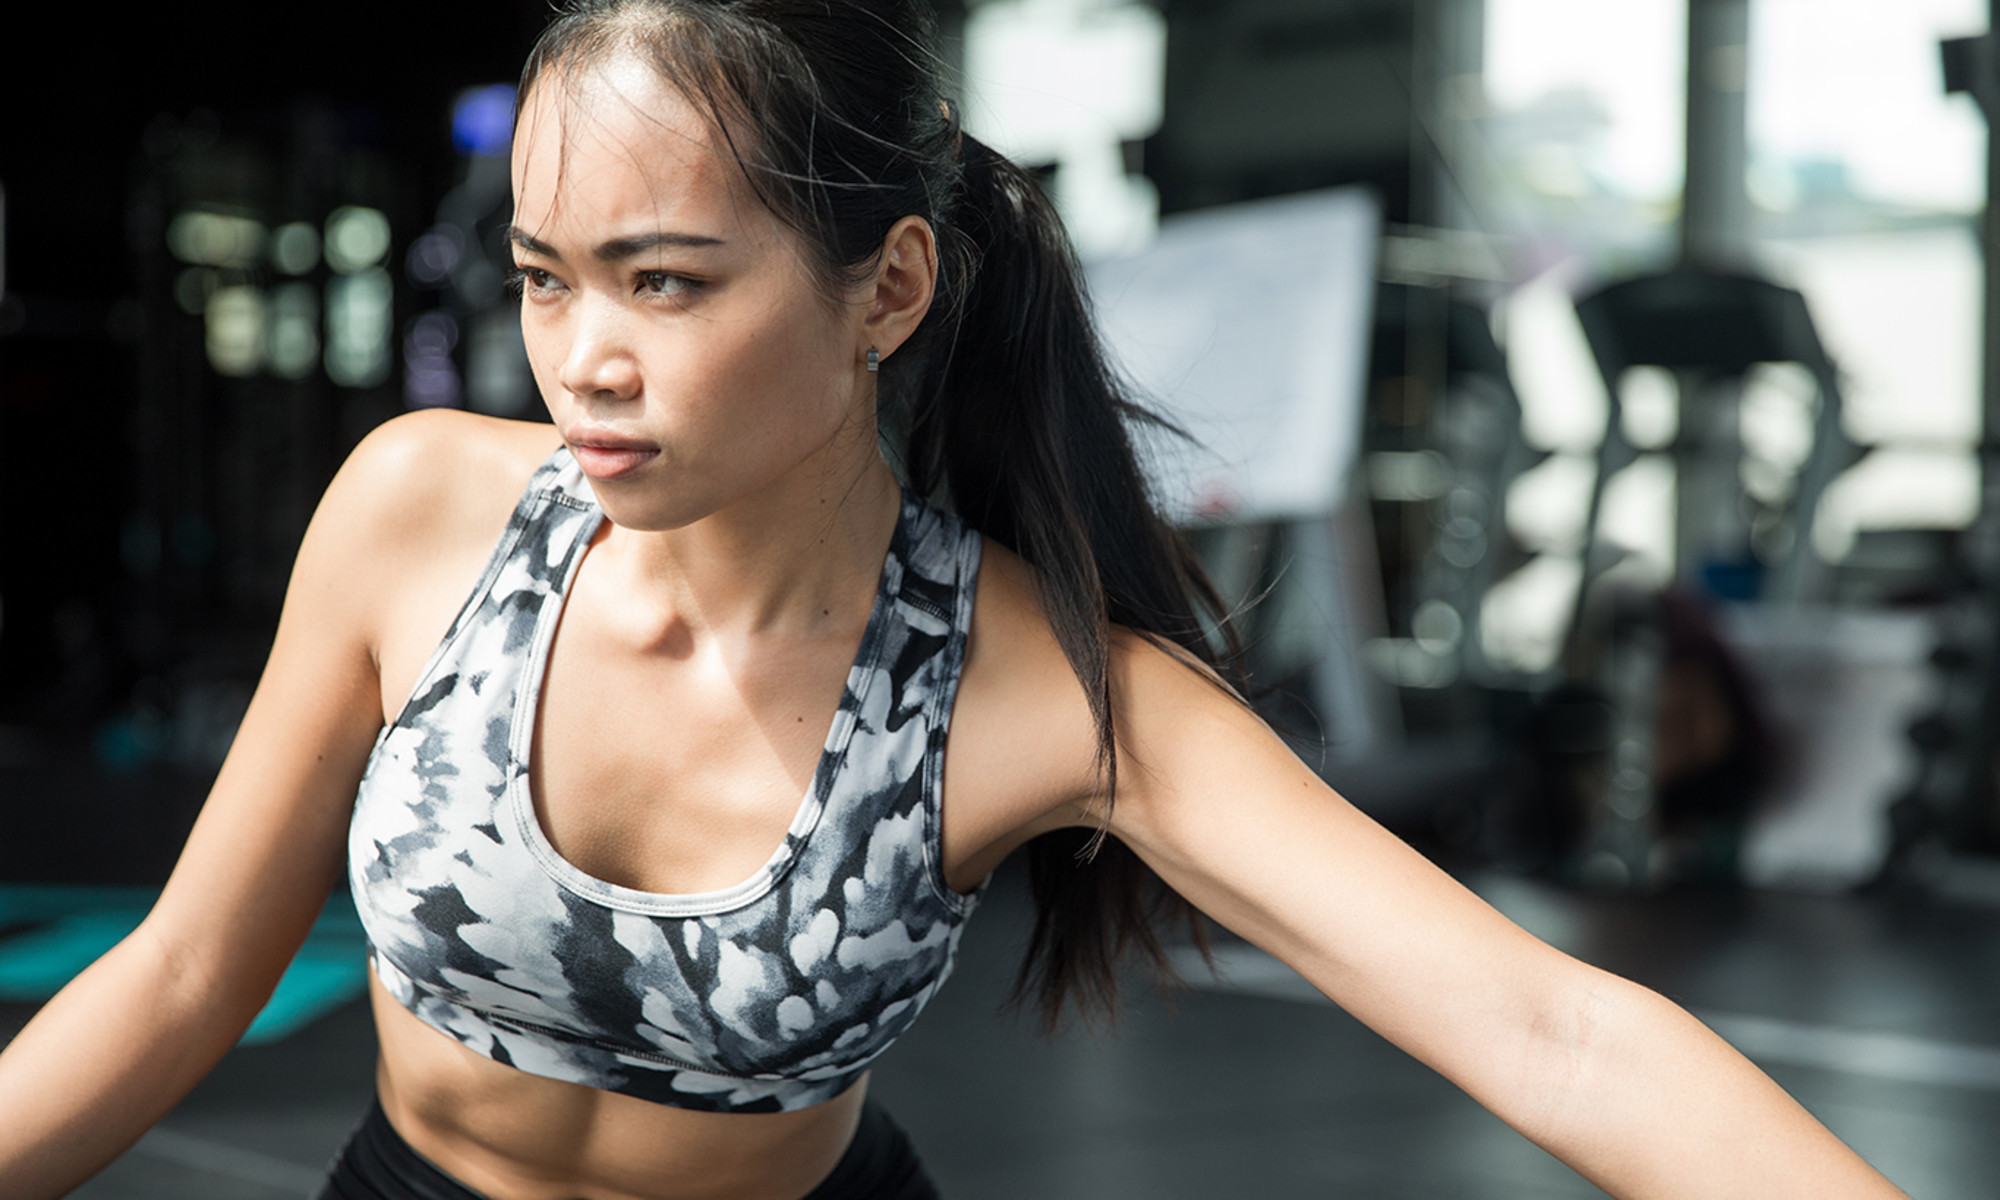 3 Tips To Build Lean Muscle, From A Dietitian & Fitness Coach